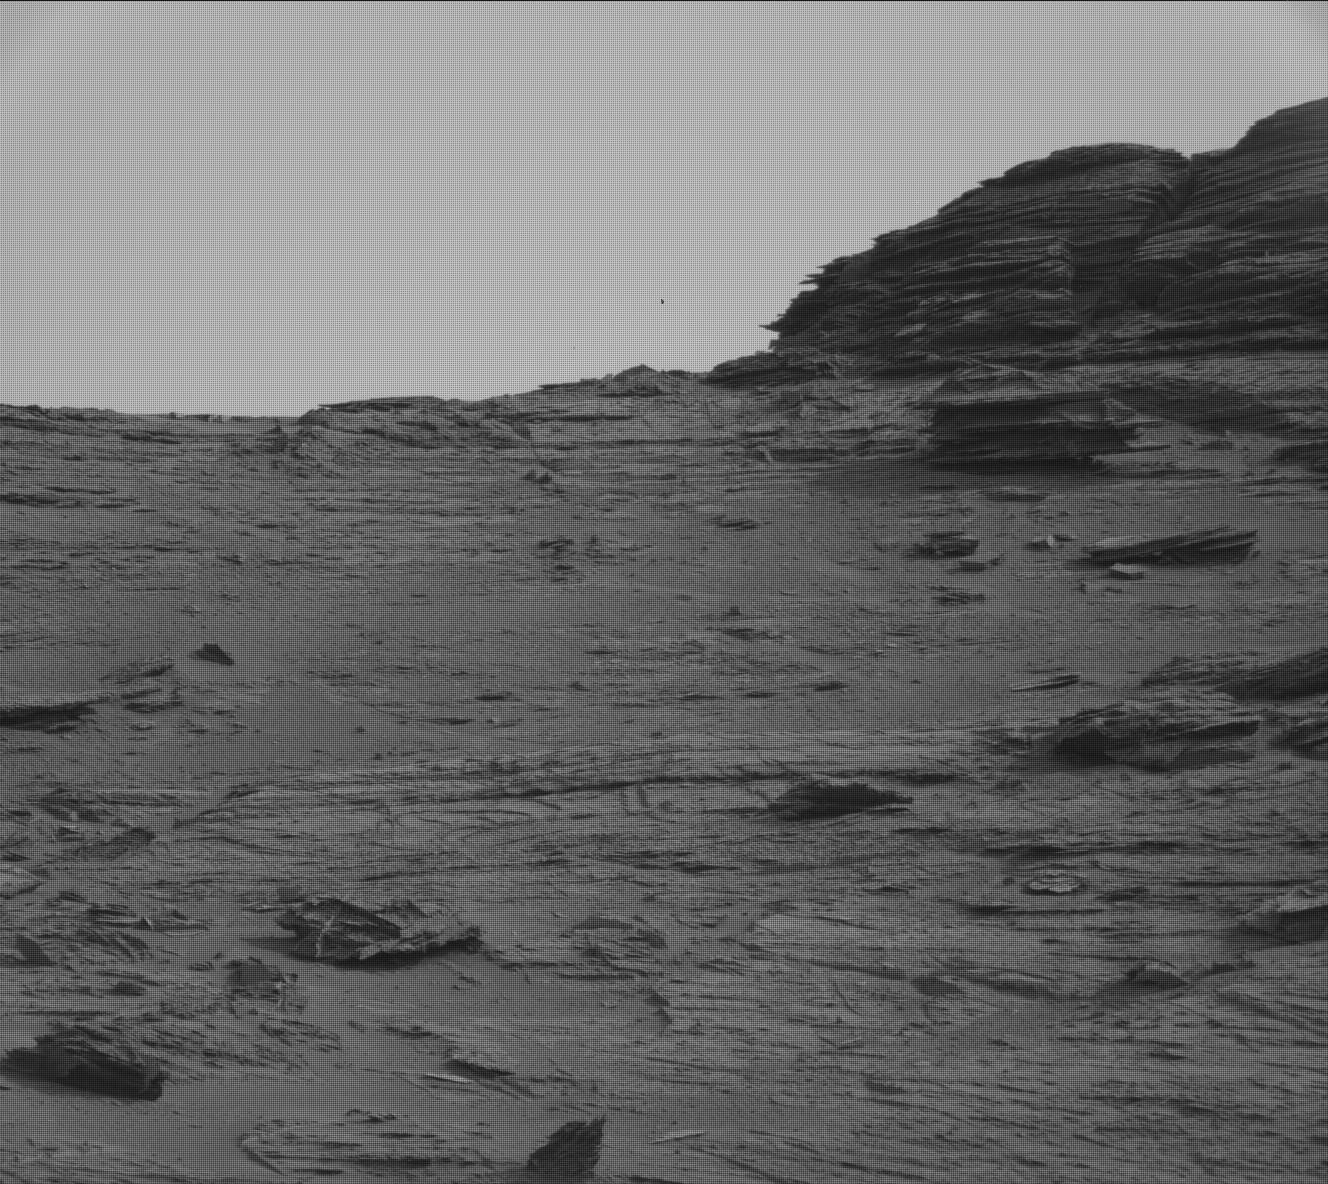 Mastcam image, showing some of our surroundings.